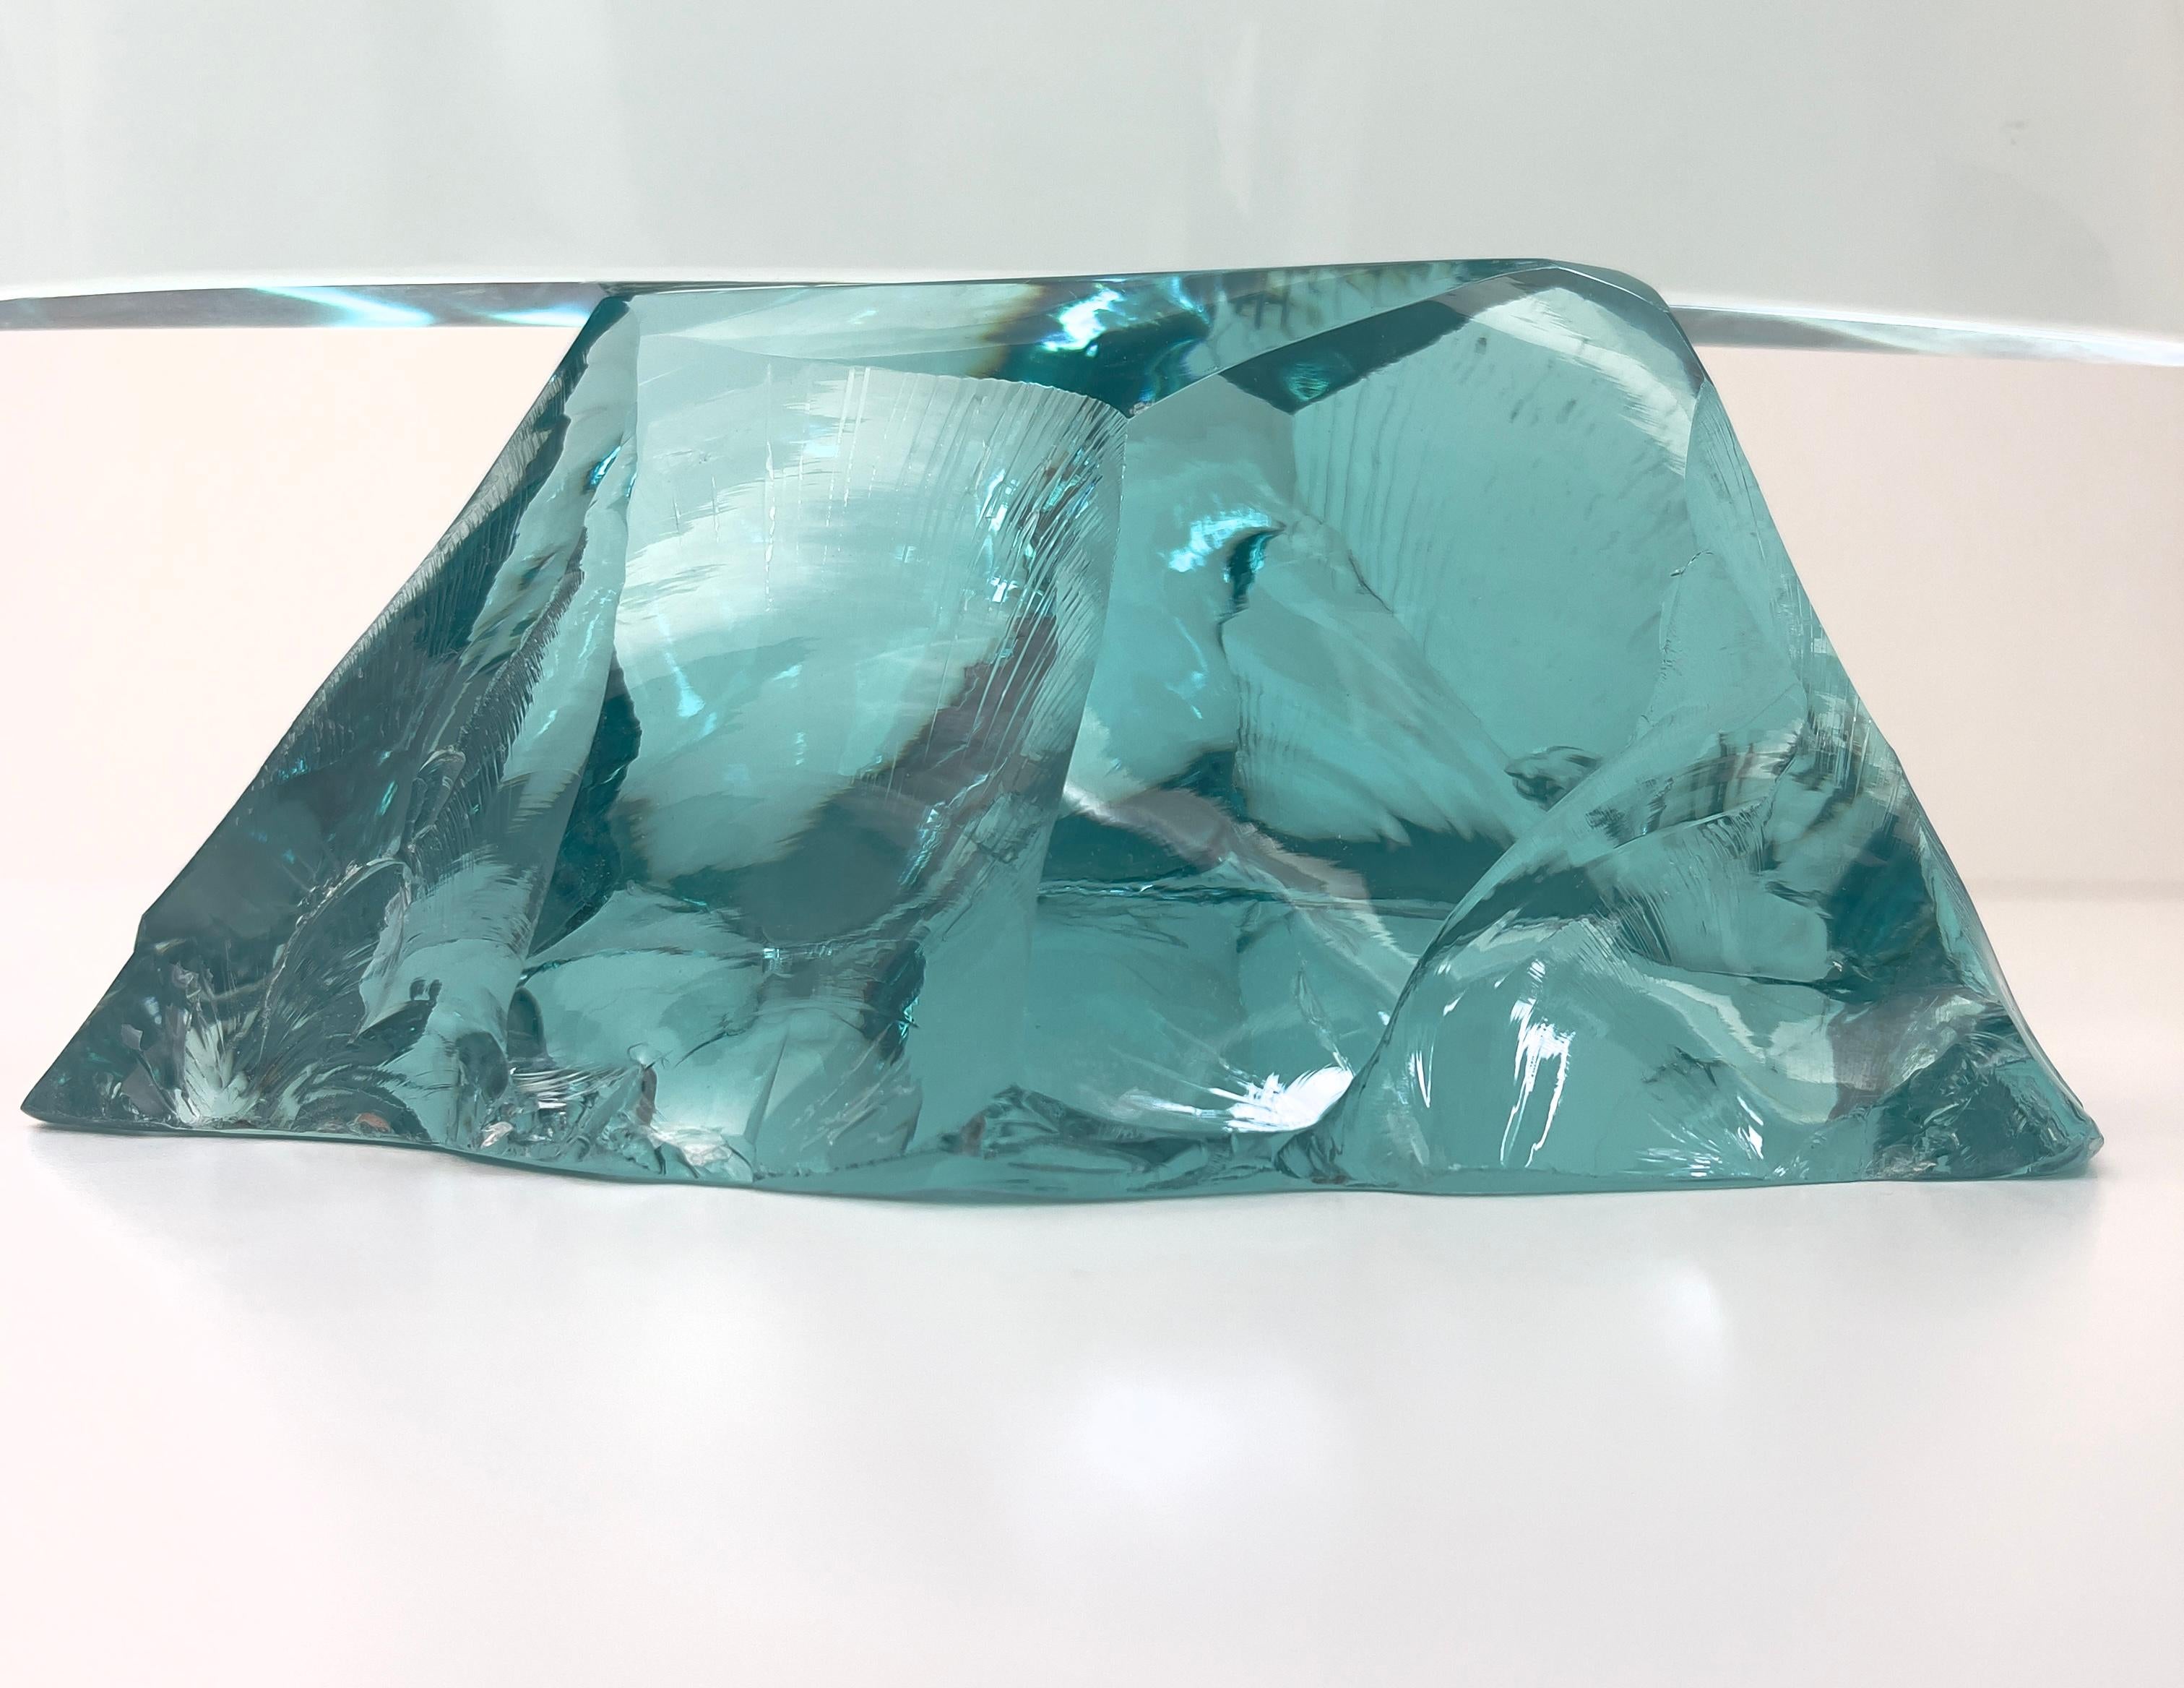 Hand-Crafted Contemporary 'Sail' Handmade Aquamarine Crystal Big Sculpture by Ghirò Studio For Sale